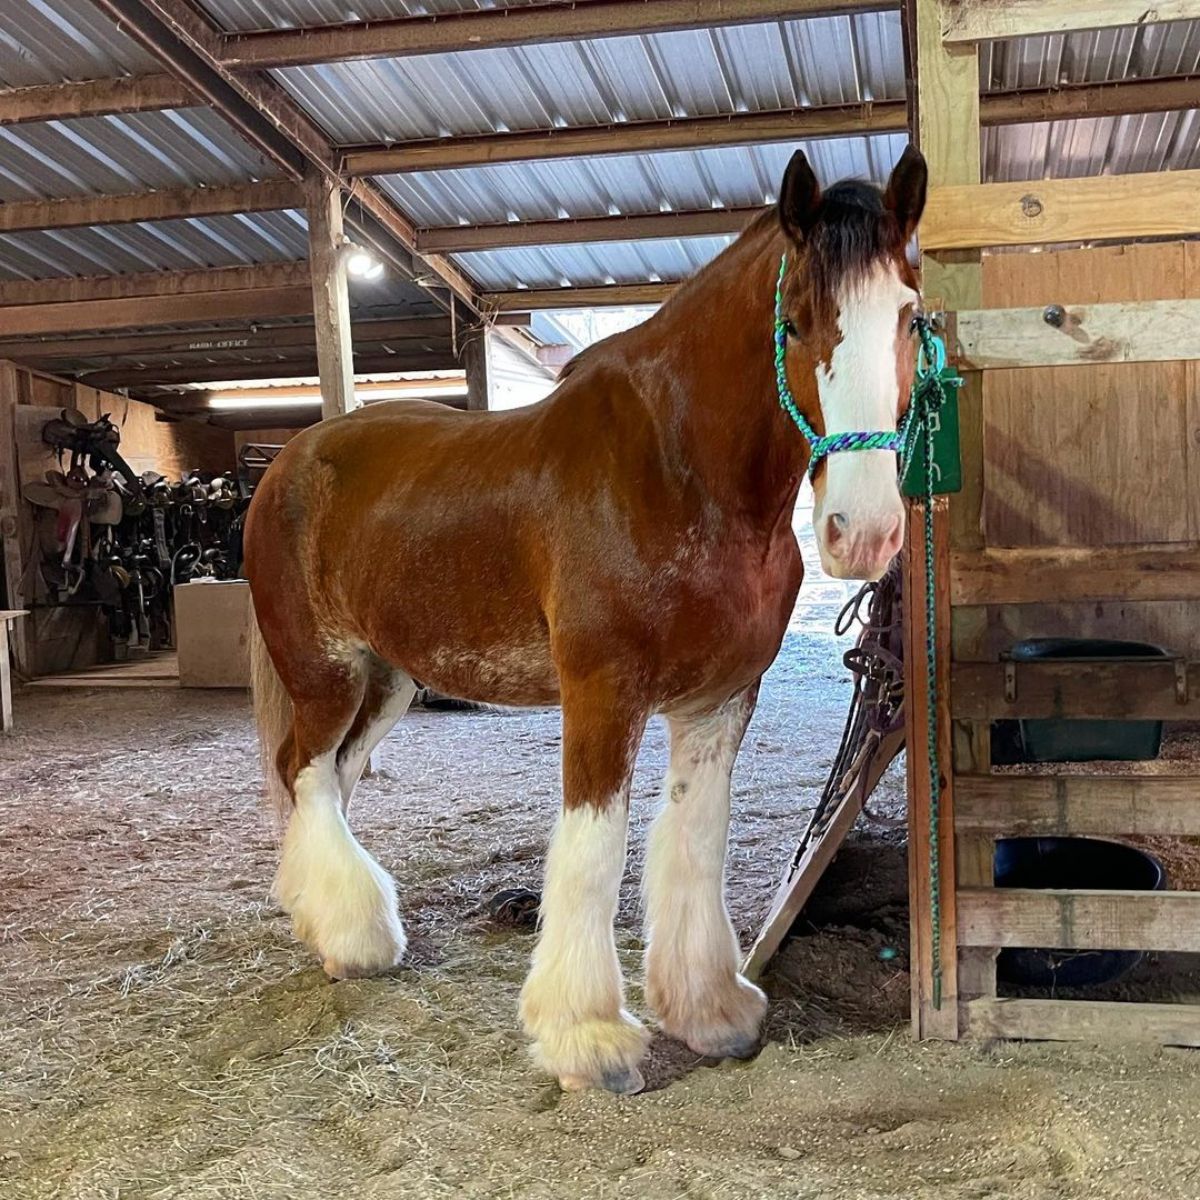 A beautiful huge Clydesdale horse stands in a stable.